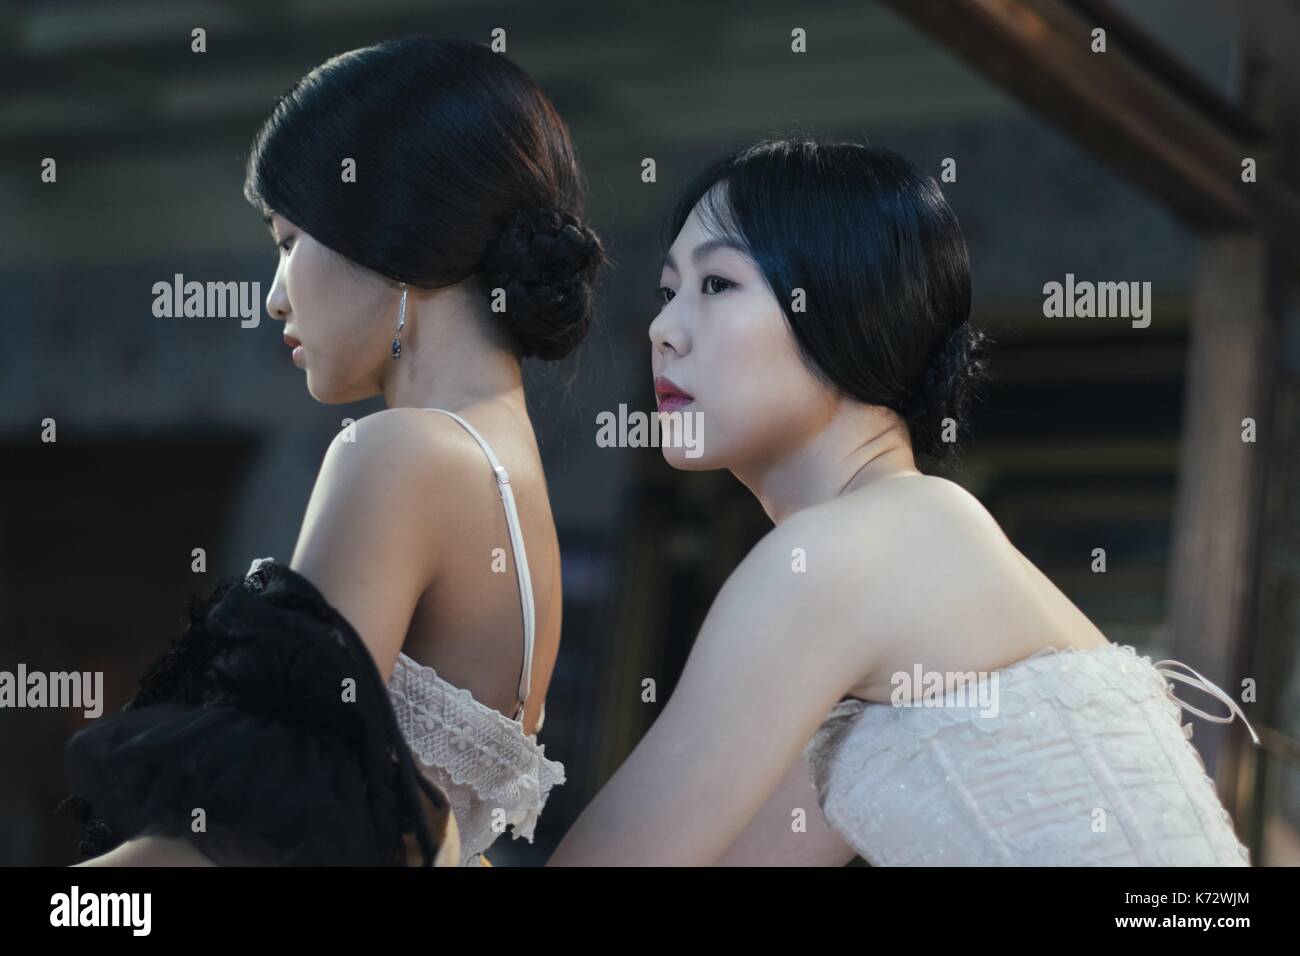 The Handmaiden  Ah-ga-ssi  Year : 2016 South Korea  Director : Chan-wook Park  Min-hee Kim, Kim Tae-ri     Photo: Jae-Hyeok Lee.  It is forbidden to reproduce the photograph out of context of the promotion of the film. It must be credited to the Film Company and/or the photographer assigned by or authorized by/allowed on the set by the Film Company. Restricted to Editorial Use. Photo12 does not grant publicity rights of the persons represented. Stock Photo